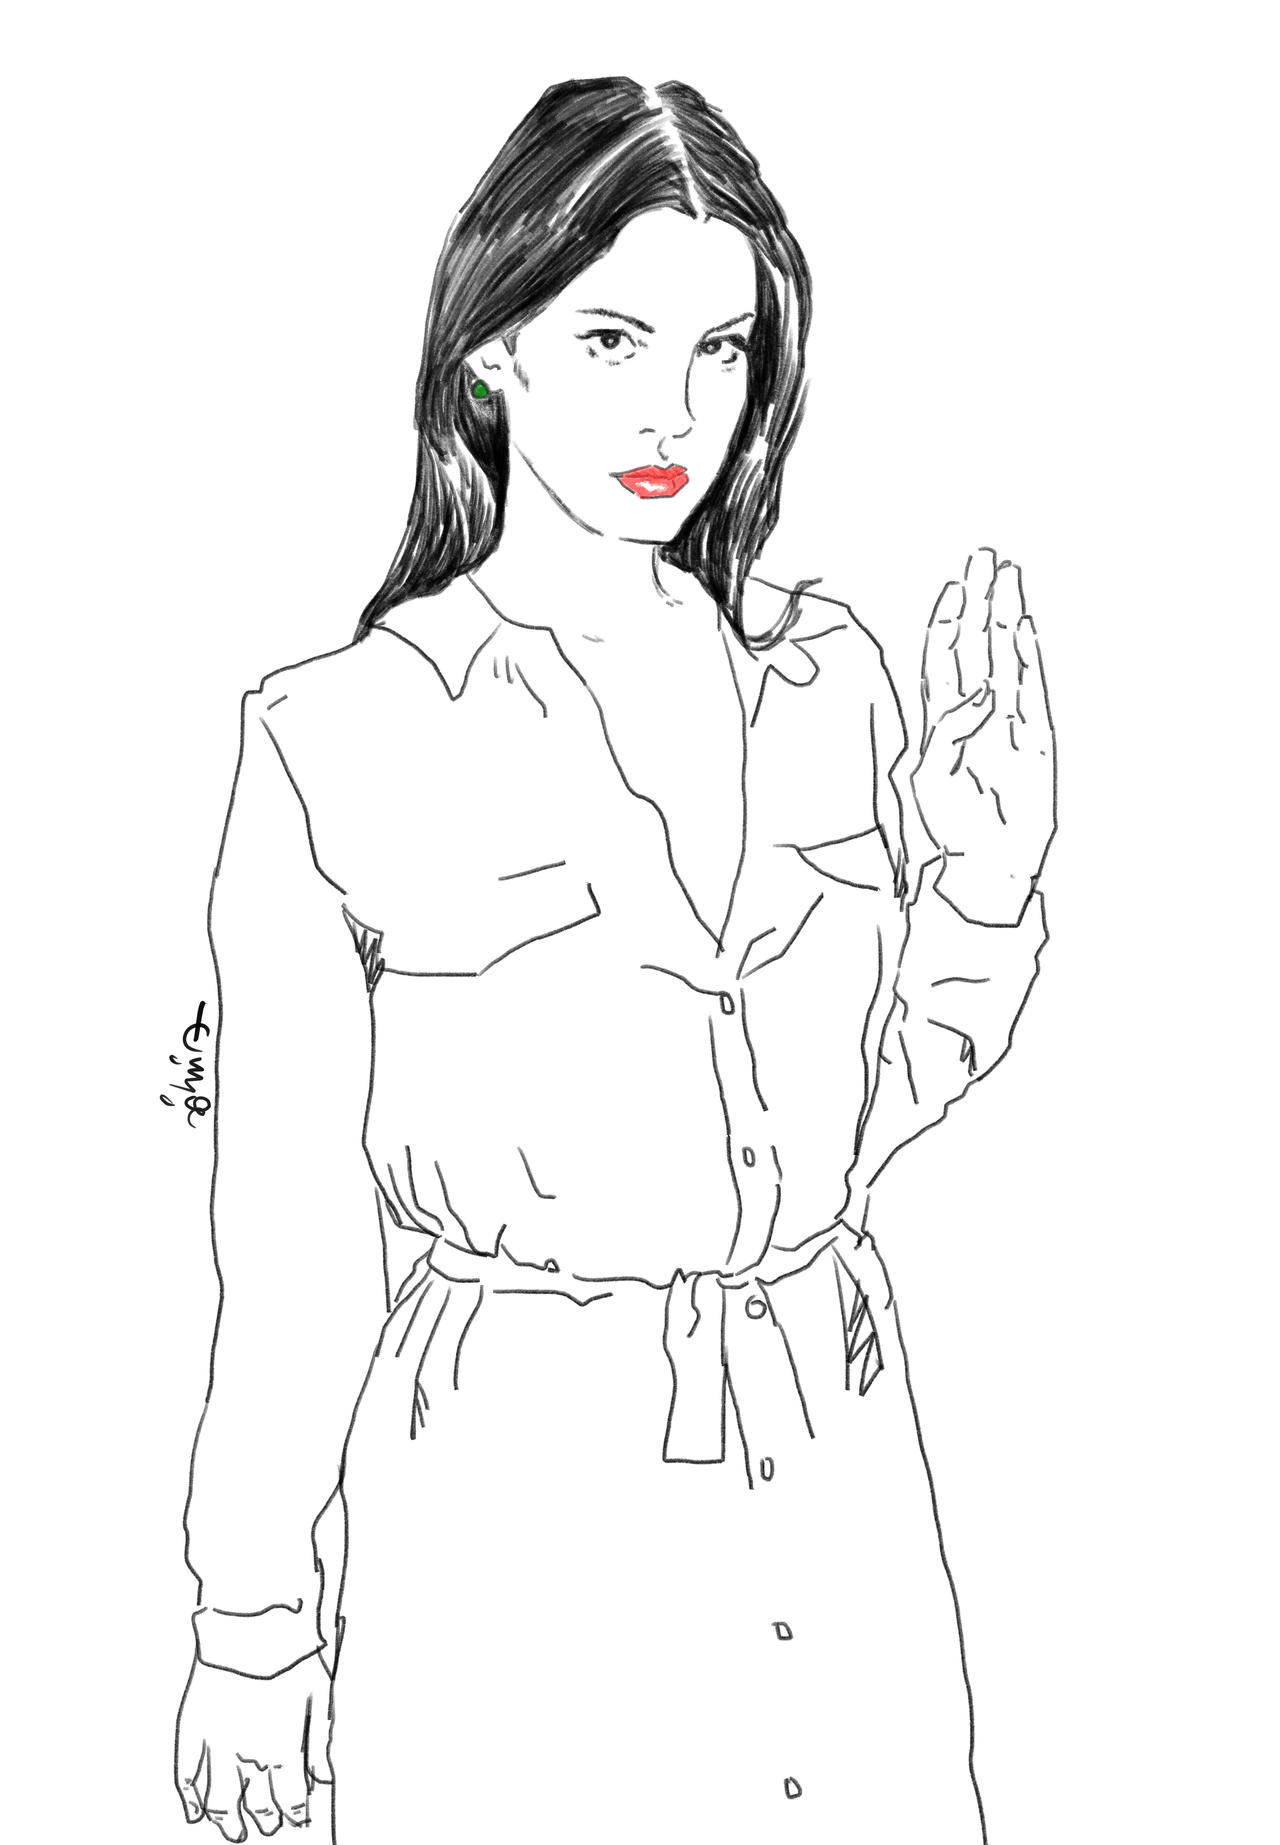 Lana del rey drawing by quilvia on